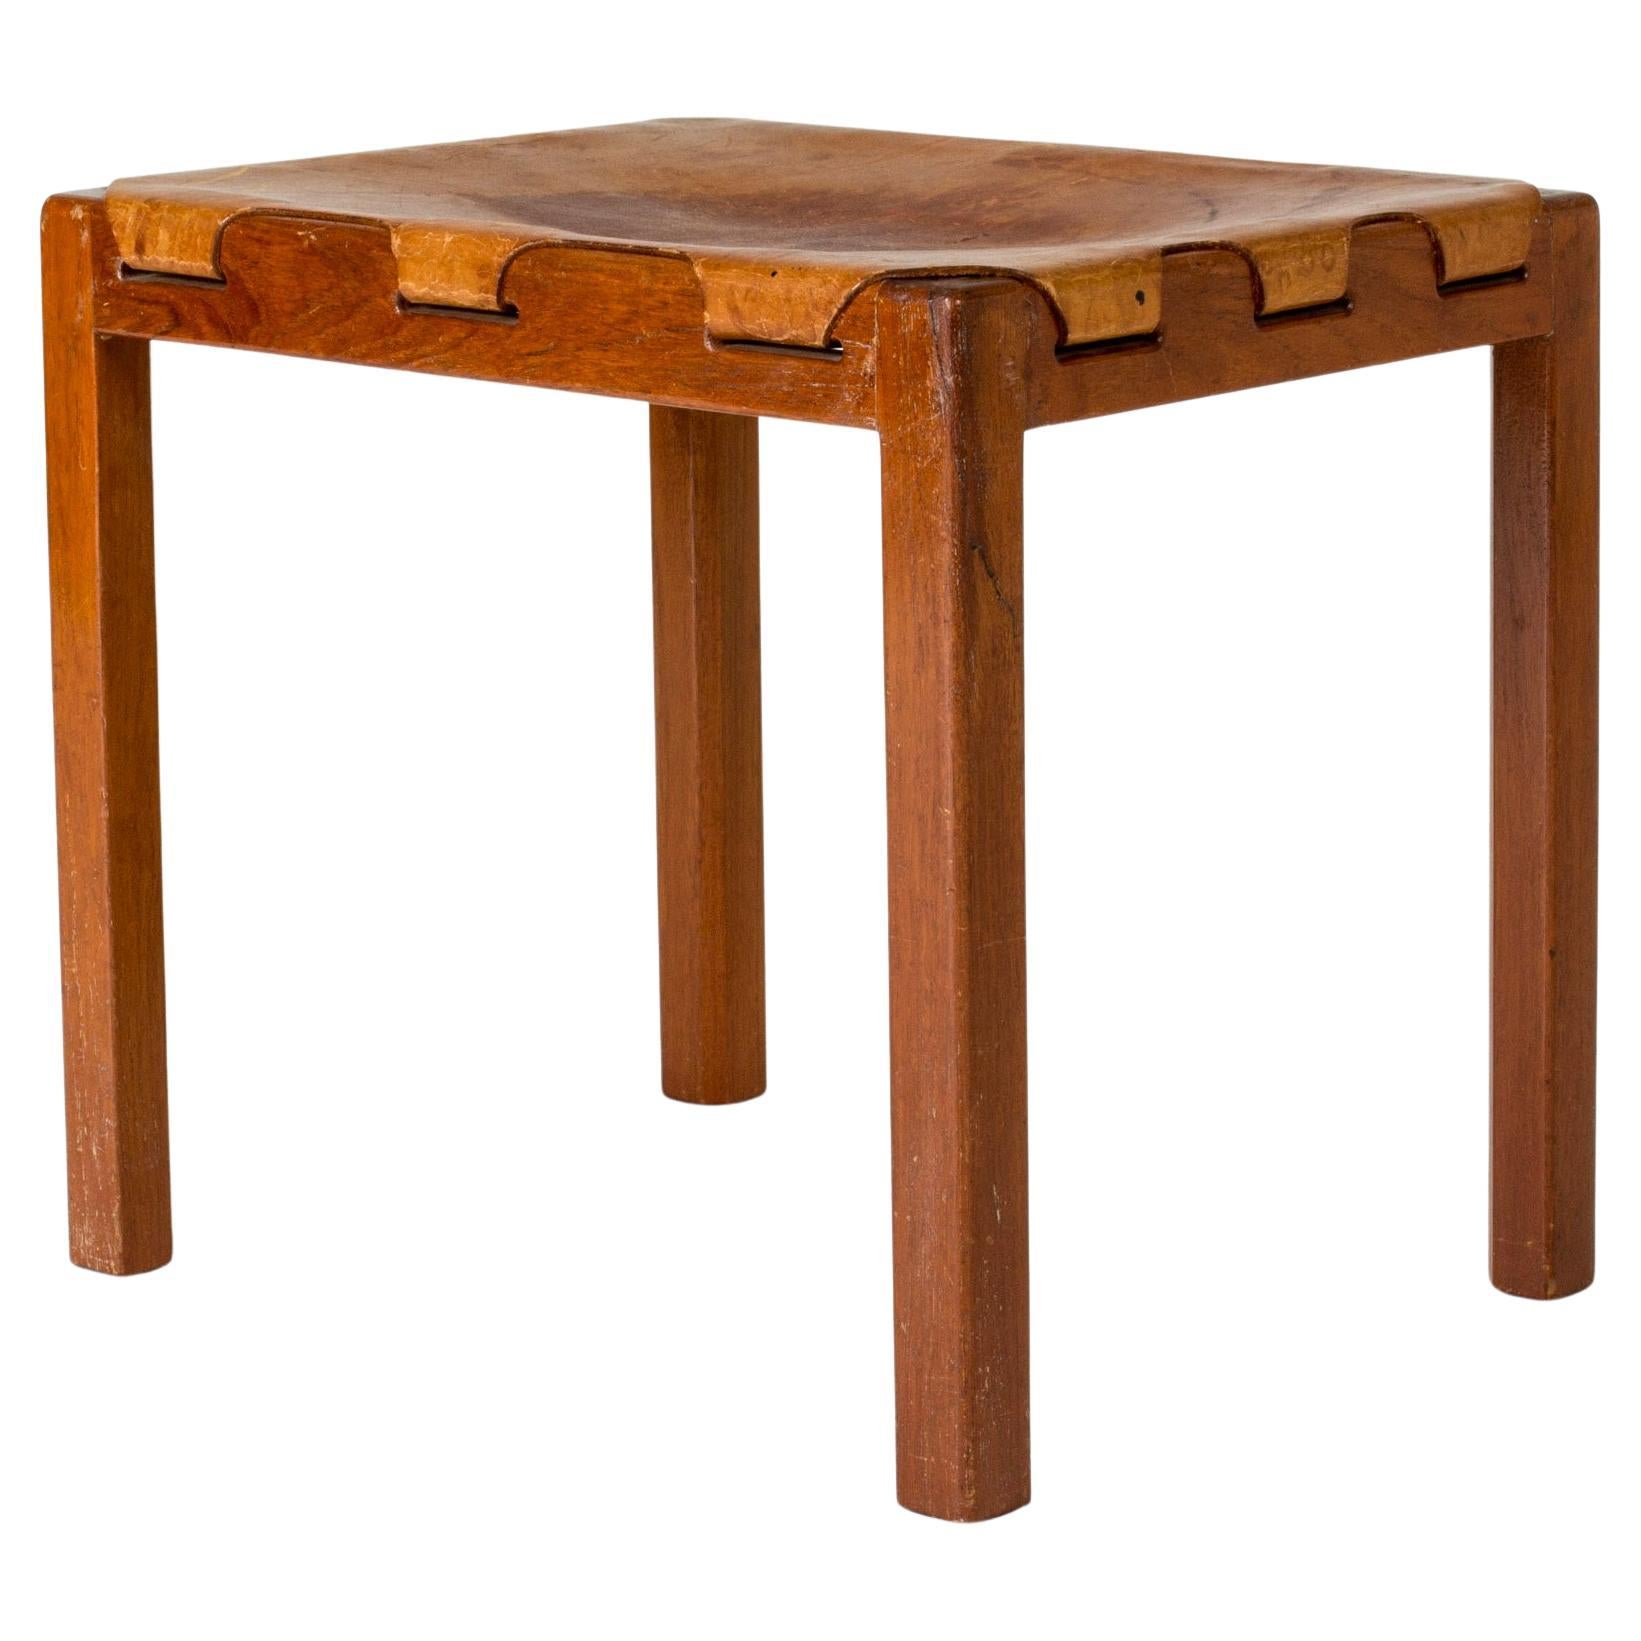 Midcentury Modern Stool, mahogany and leather, Sweden, 1950s For Sale